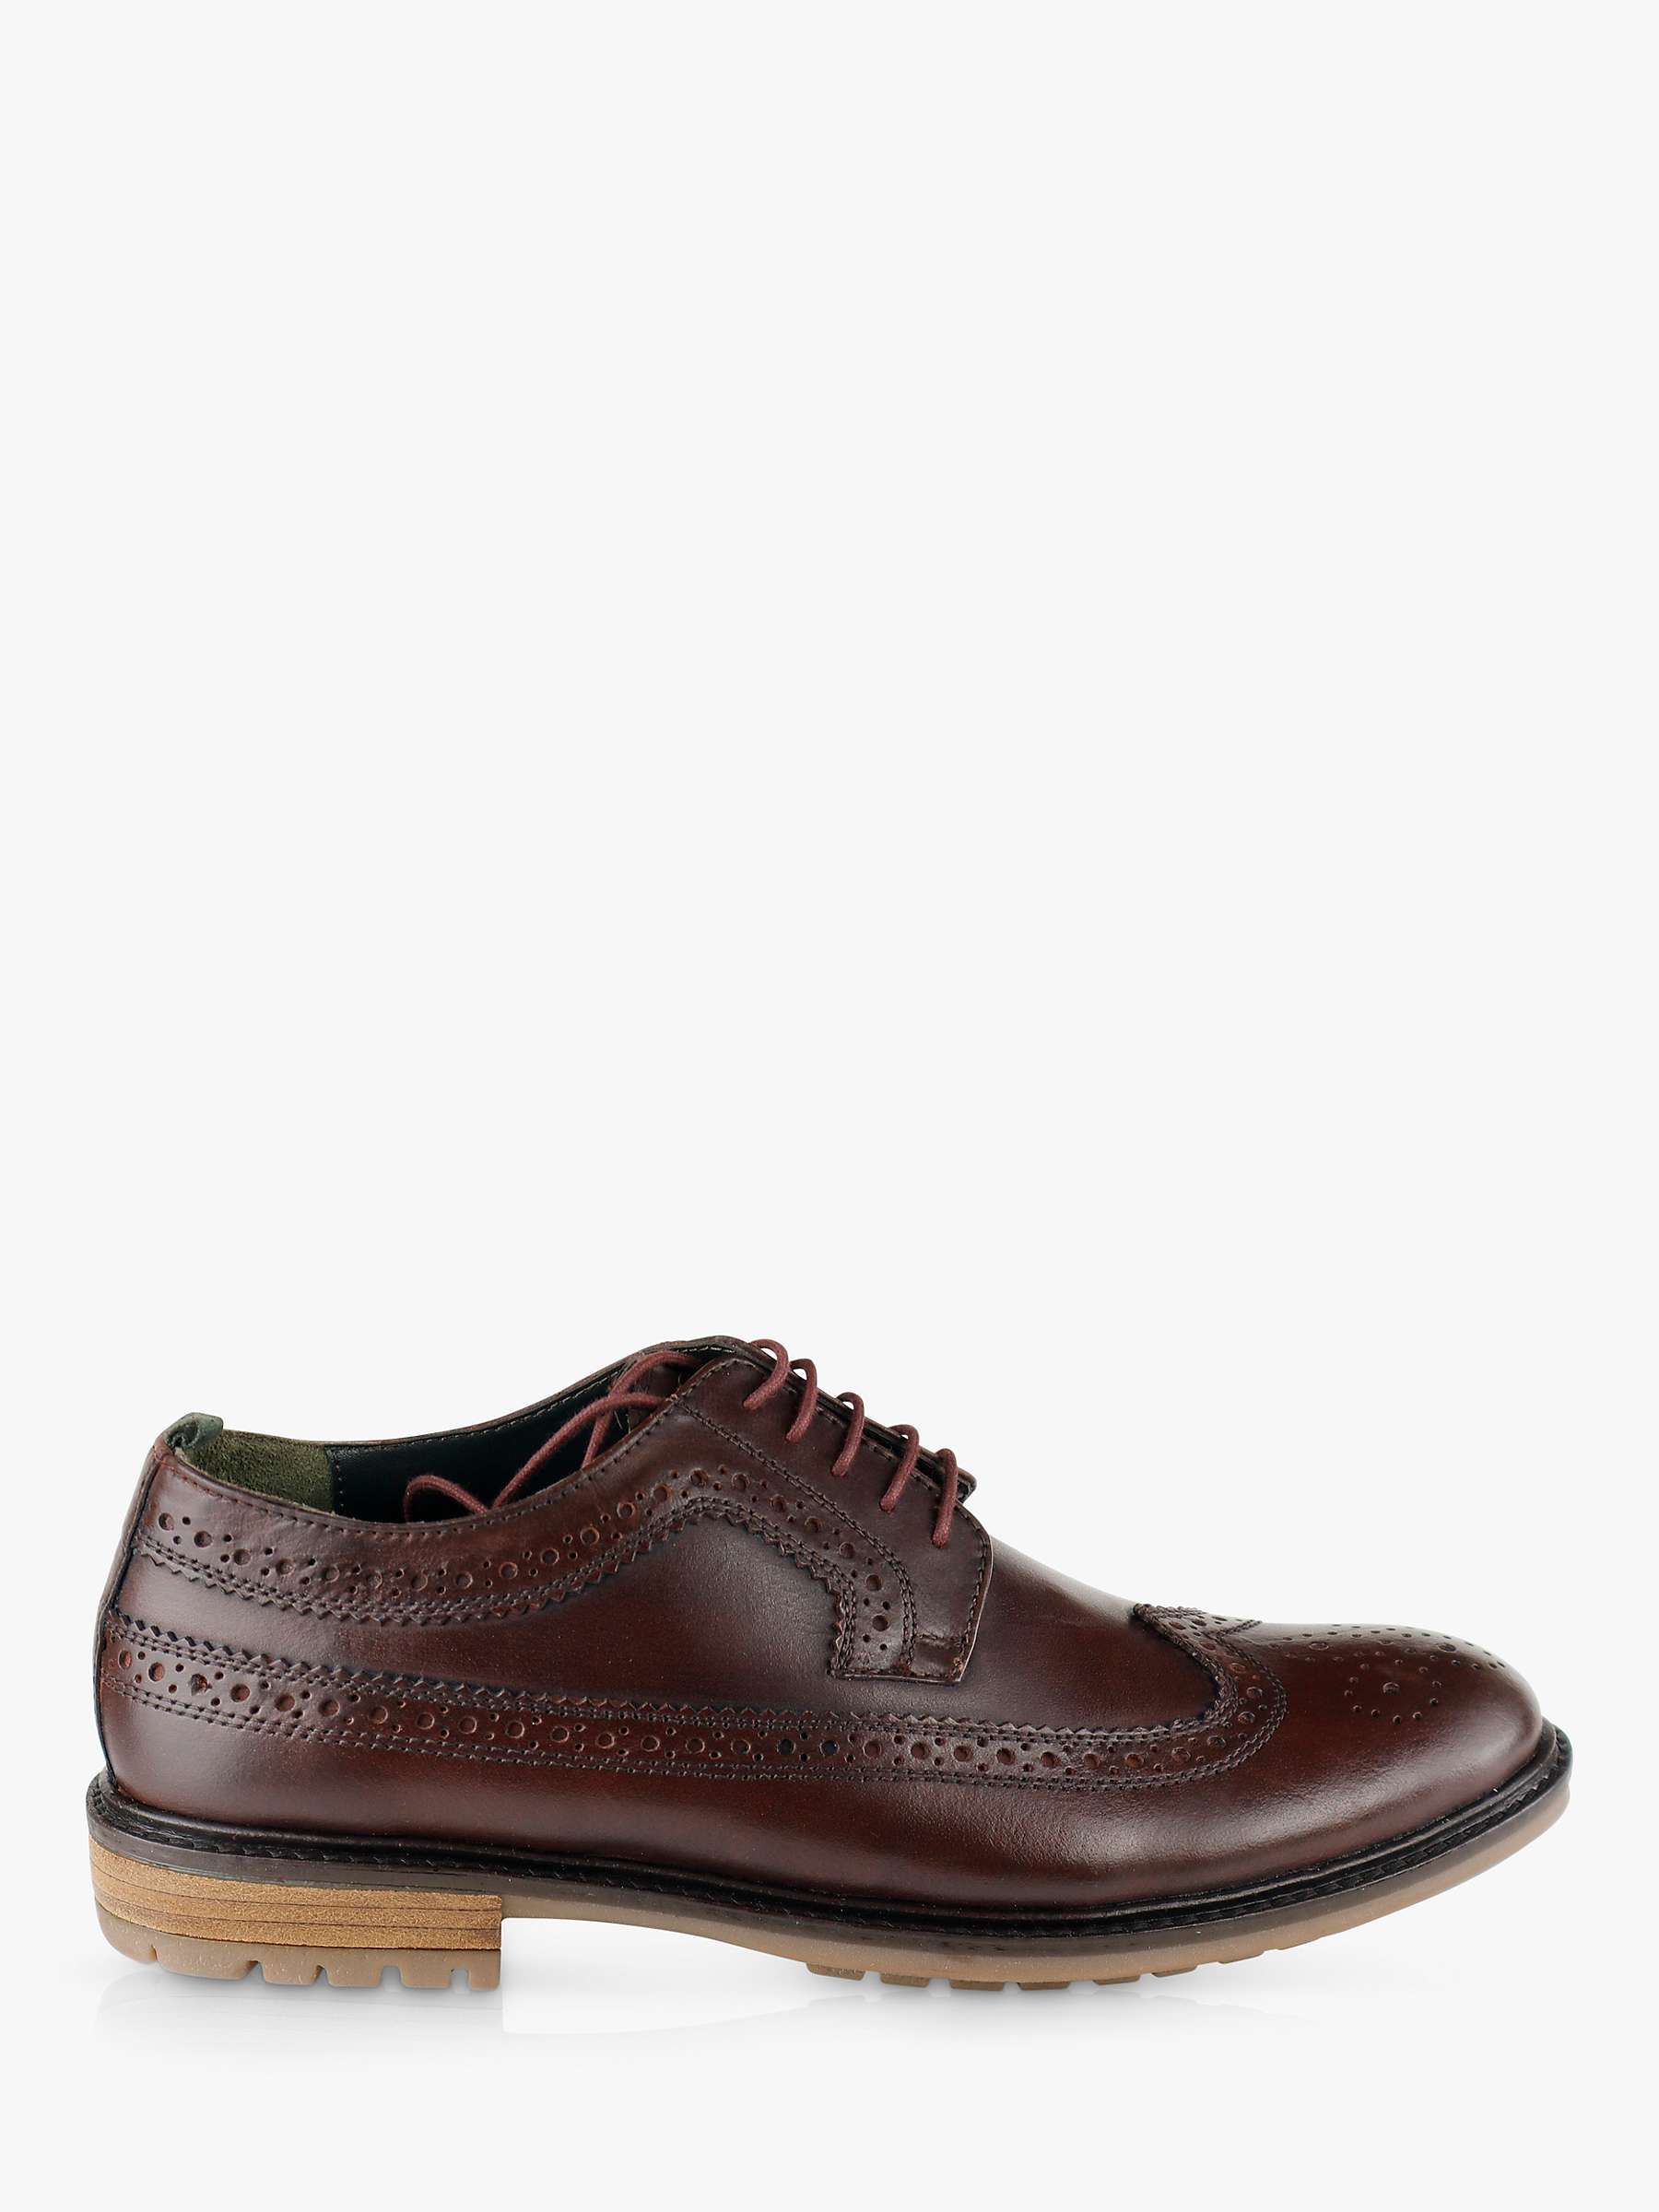 Buy Silver Street London Fenchurch Leather Brogue Shoes, Burgundy Online at johnlewis.com